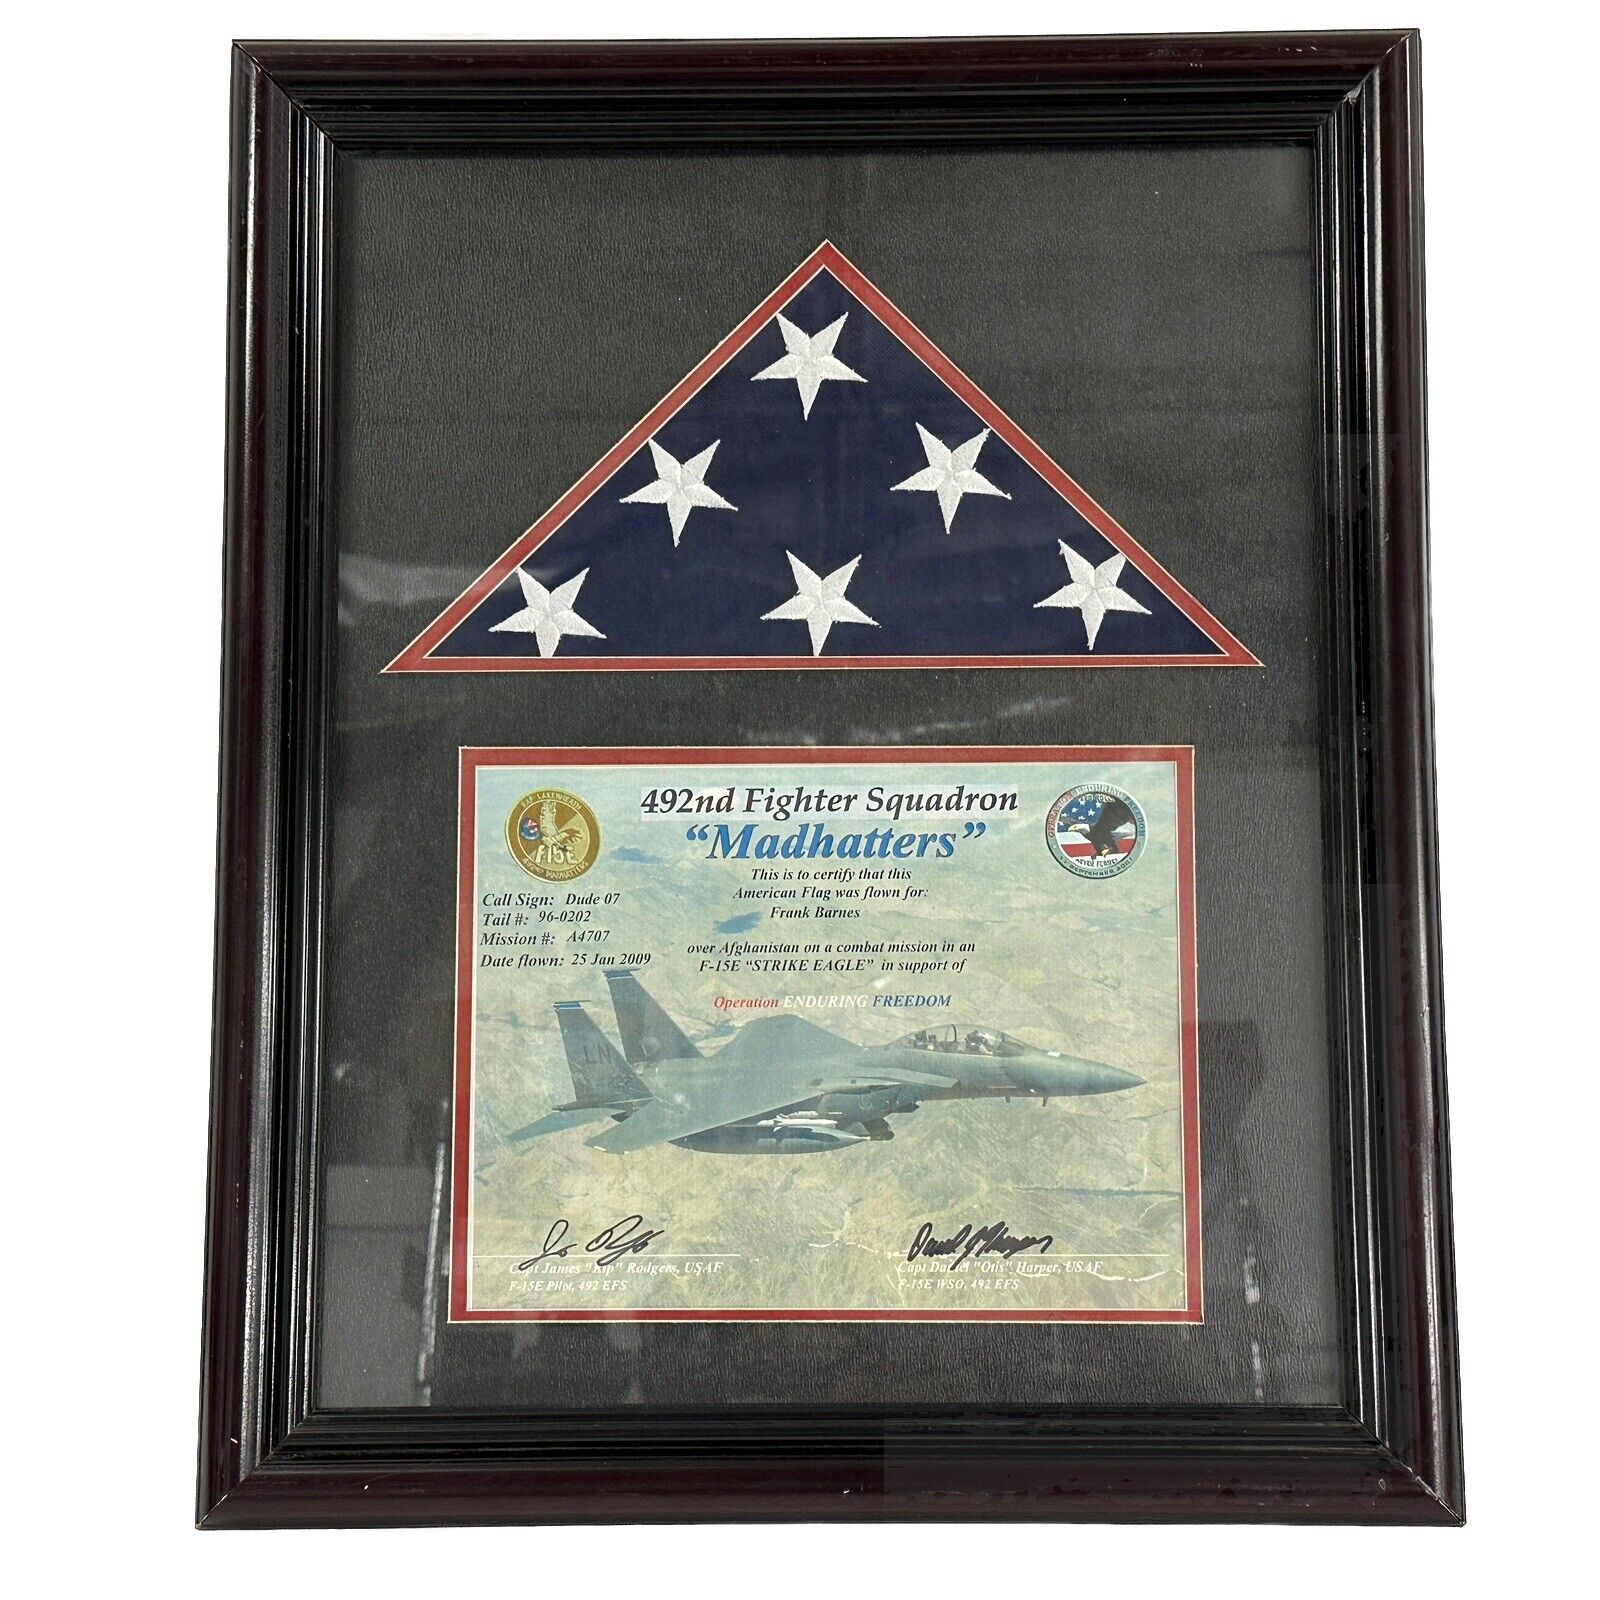 American Flag Flown Over Afghanistan In Support of Operation Enduring Freedom